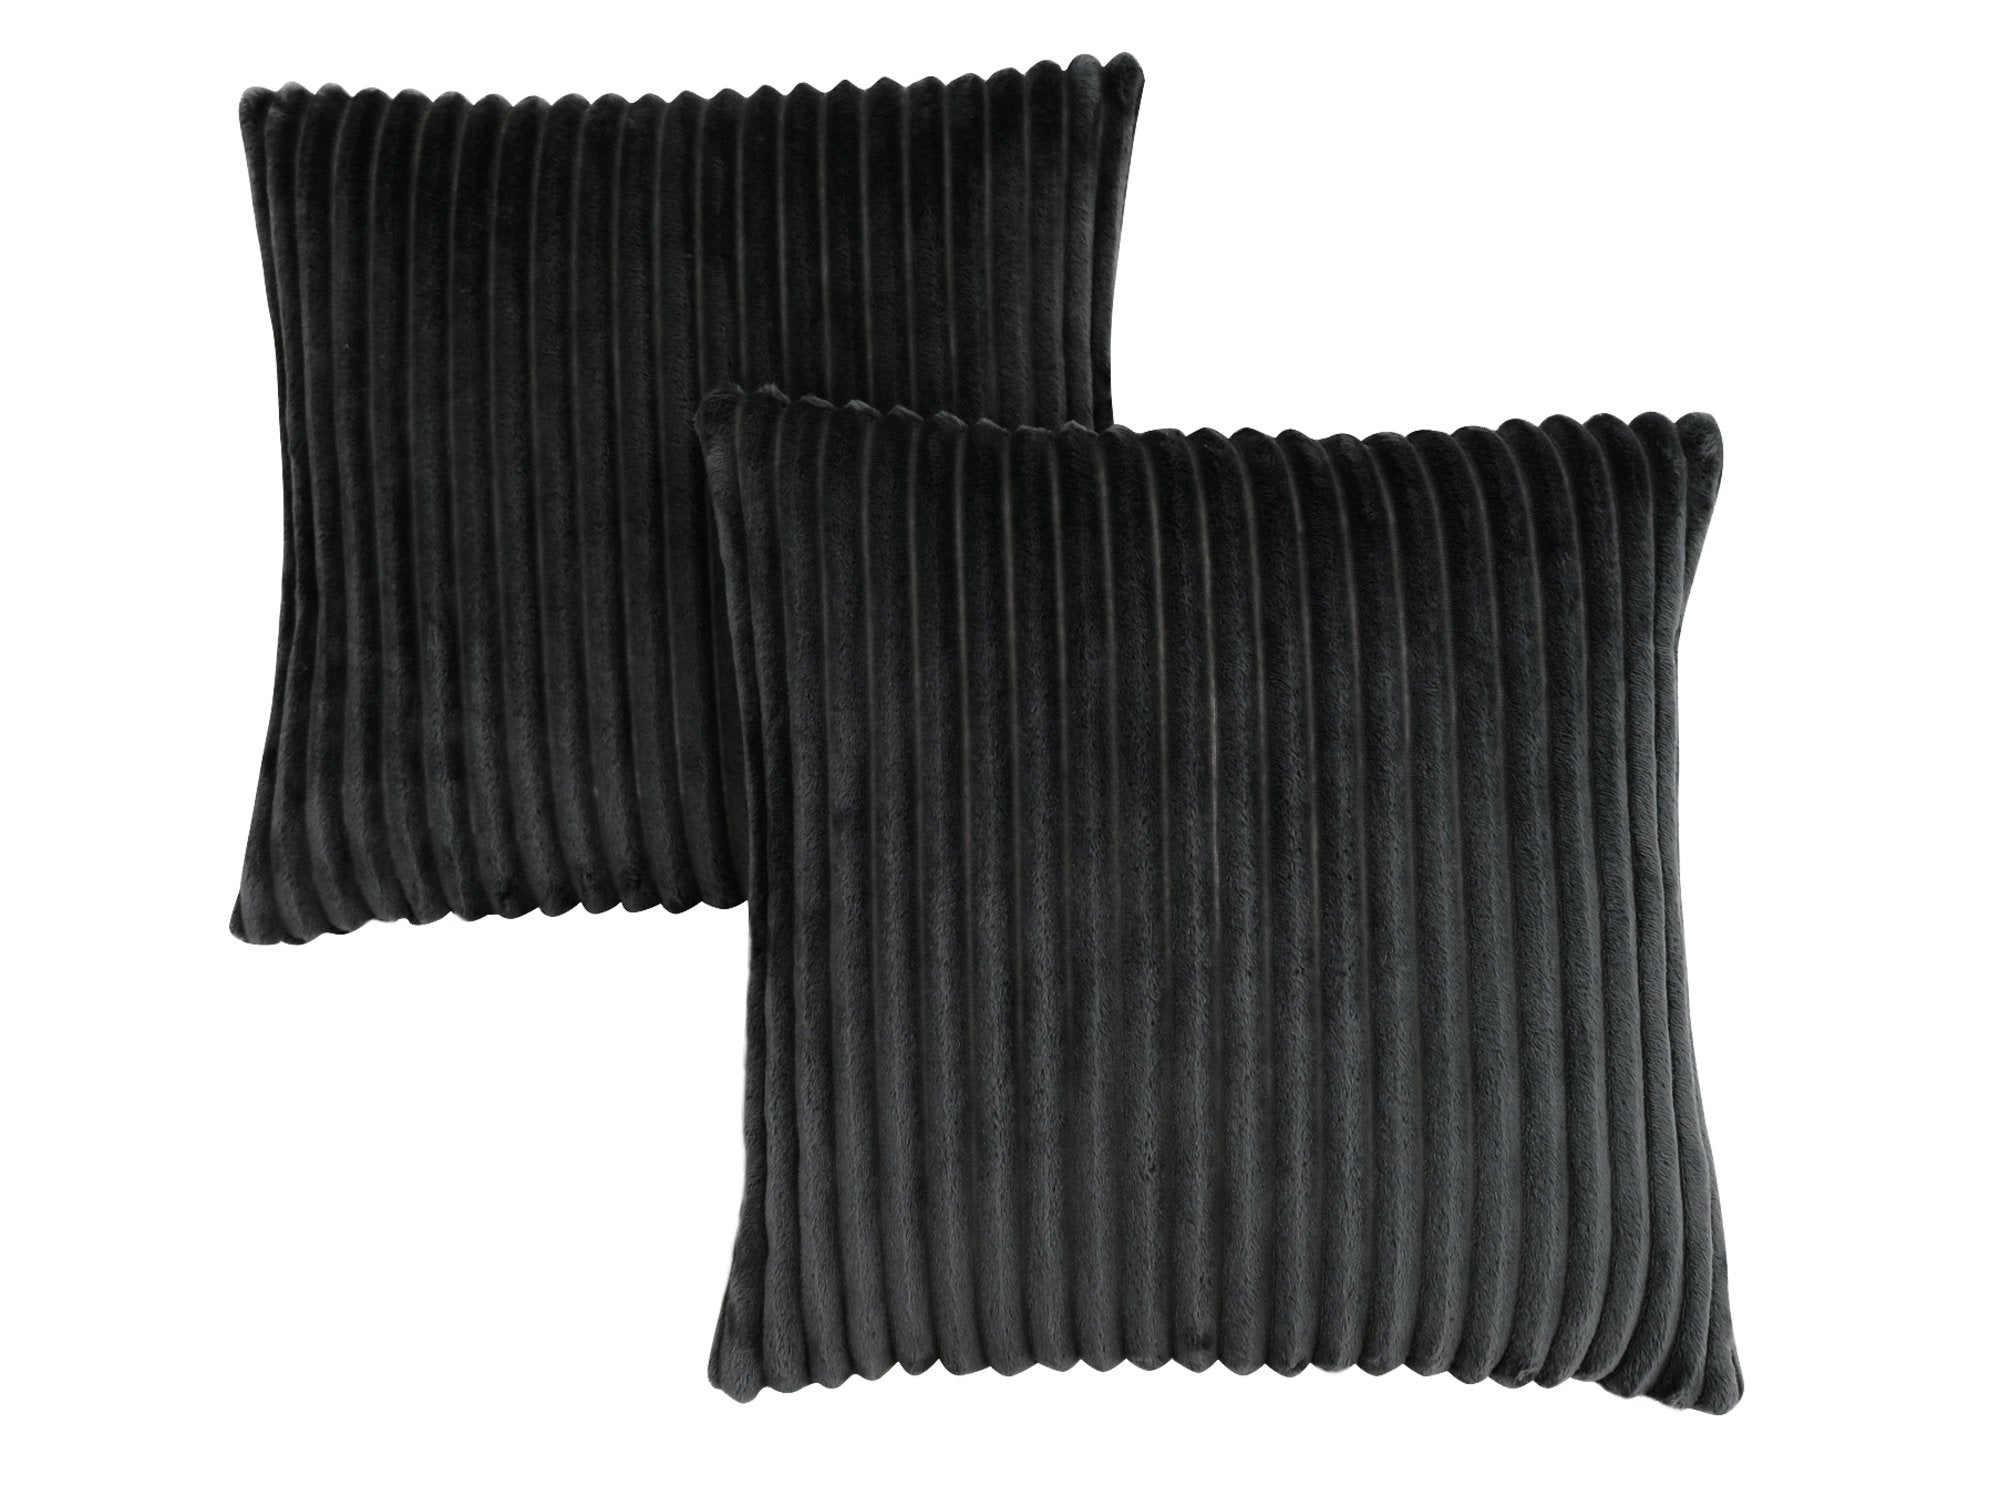 MN-989357    Pillows, Set Of 2, 18 X 18 Square, Insert Included, Decorative Throw, Accent, Sofa, Couch, Bed, Faux Fur Polyester Fabric, Hypoallergenic Soft Polyester Insert, Black, Transitional